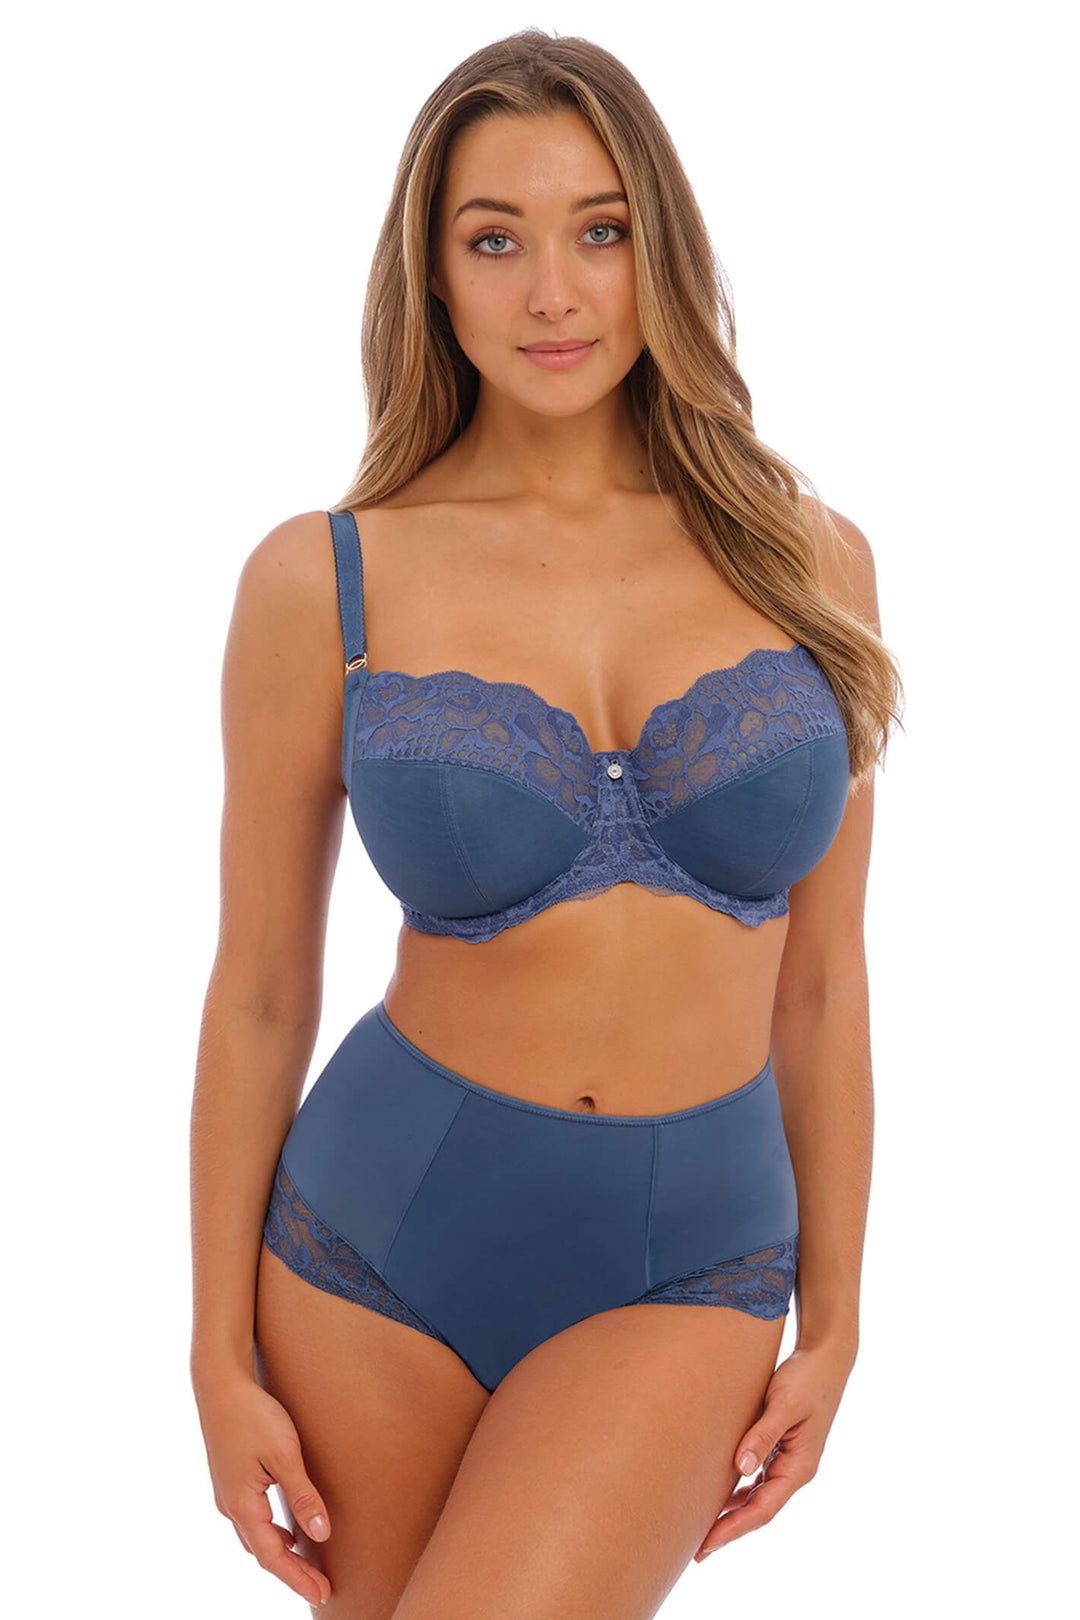 Fantasie Reflect Side Support Bra in Nude: 34F